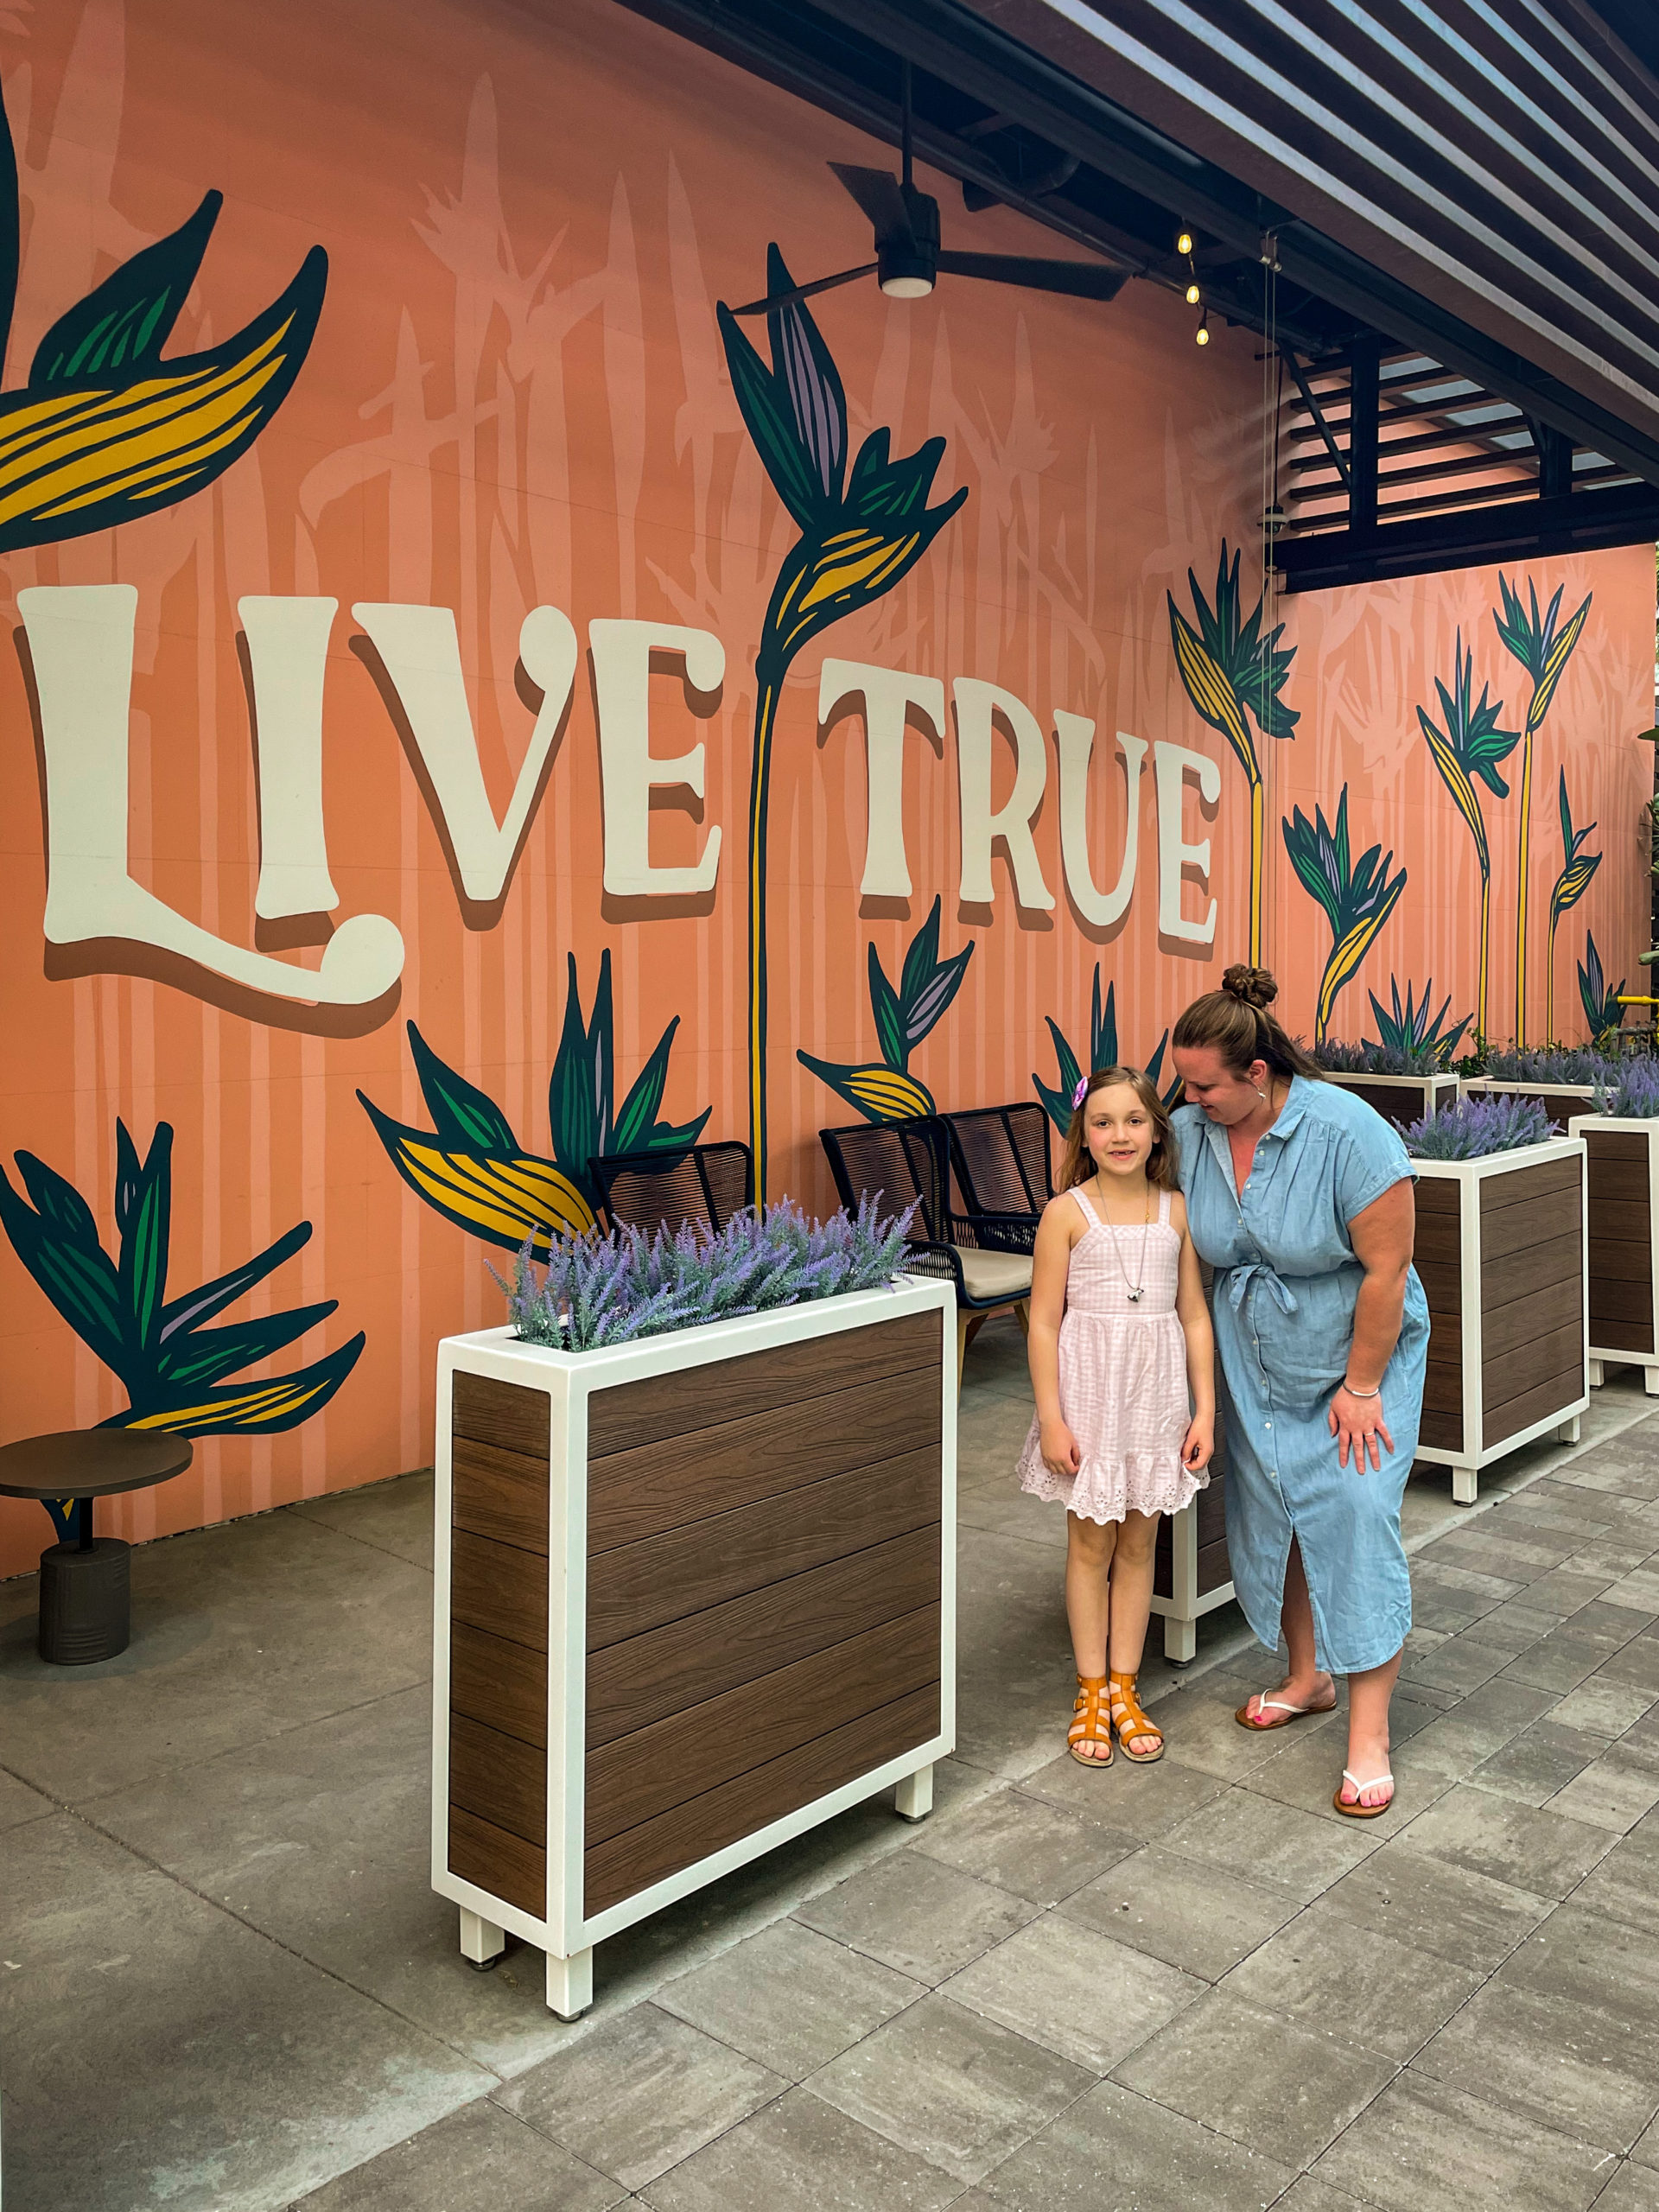 A young girl and her mom stand in front of a mural that says "Live True" in Midtown Tampa.